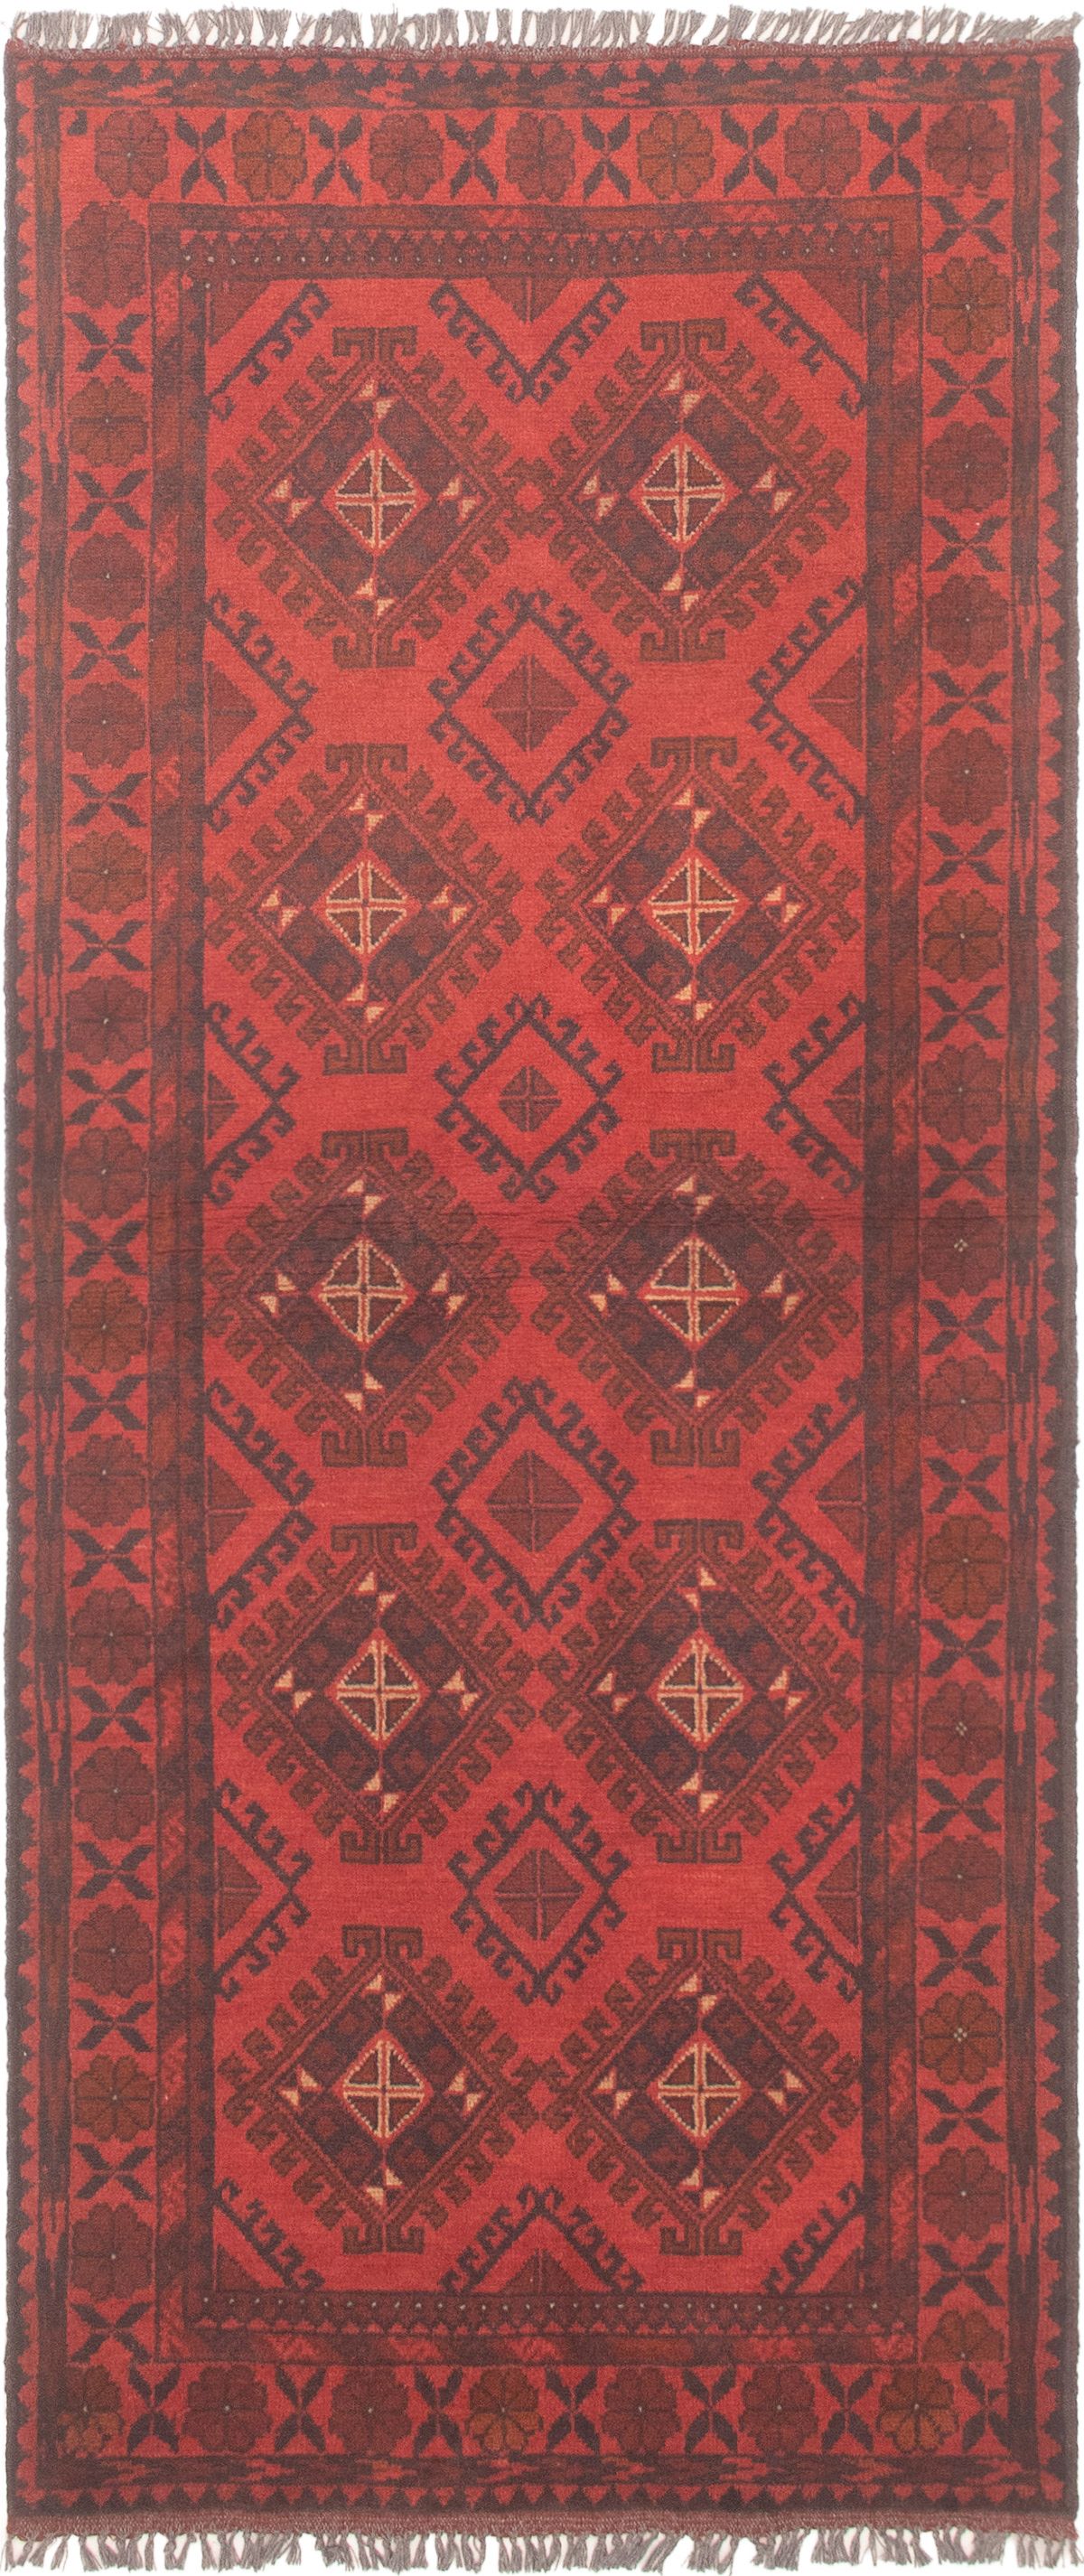 Hand-knotted Finest Khal Mohammadi Red Wool Rug 2'9" x 6'5" Size: 2'9" x 6'5"  